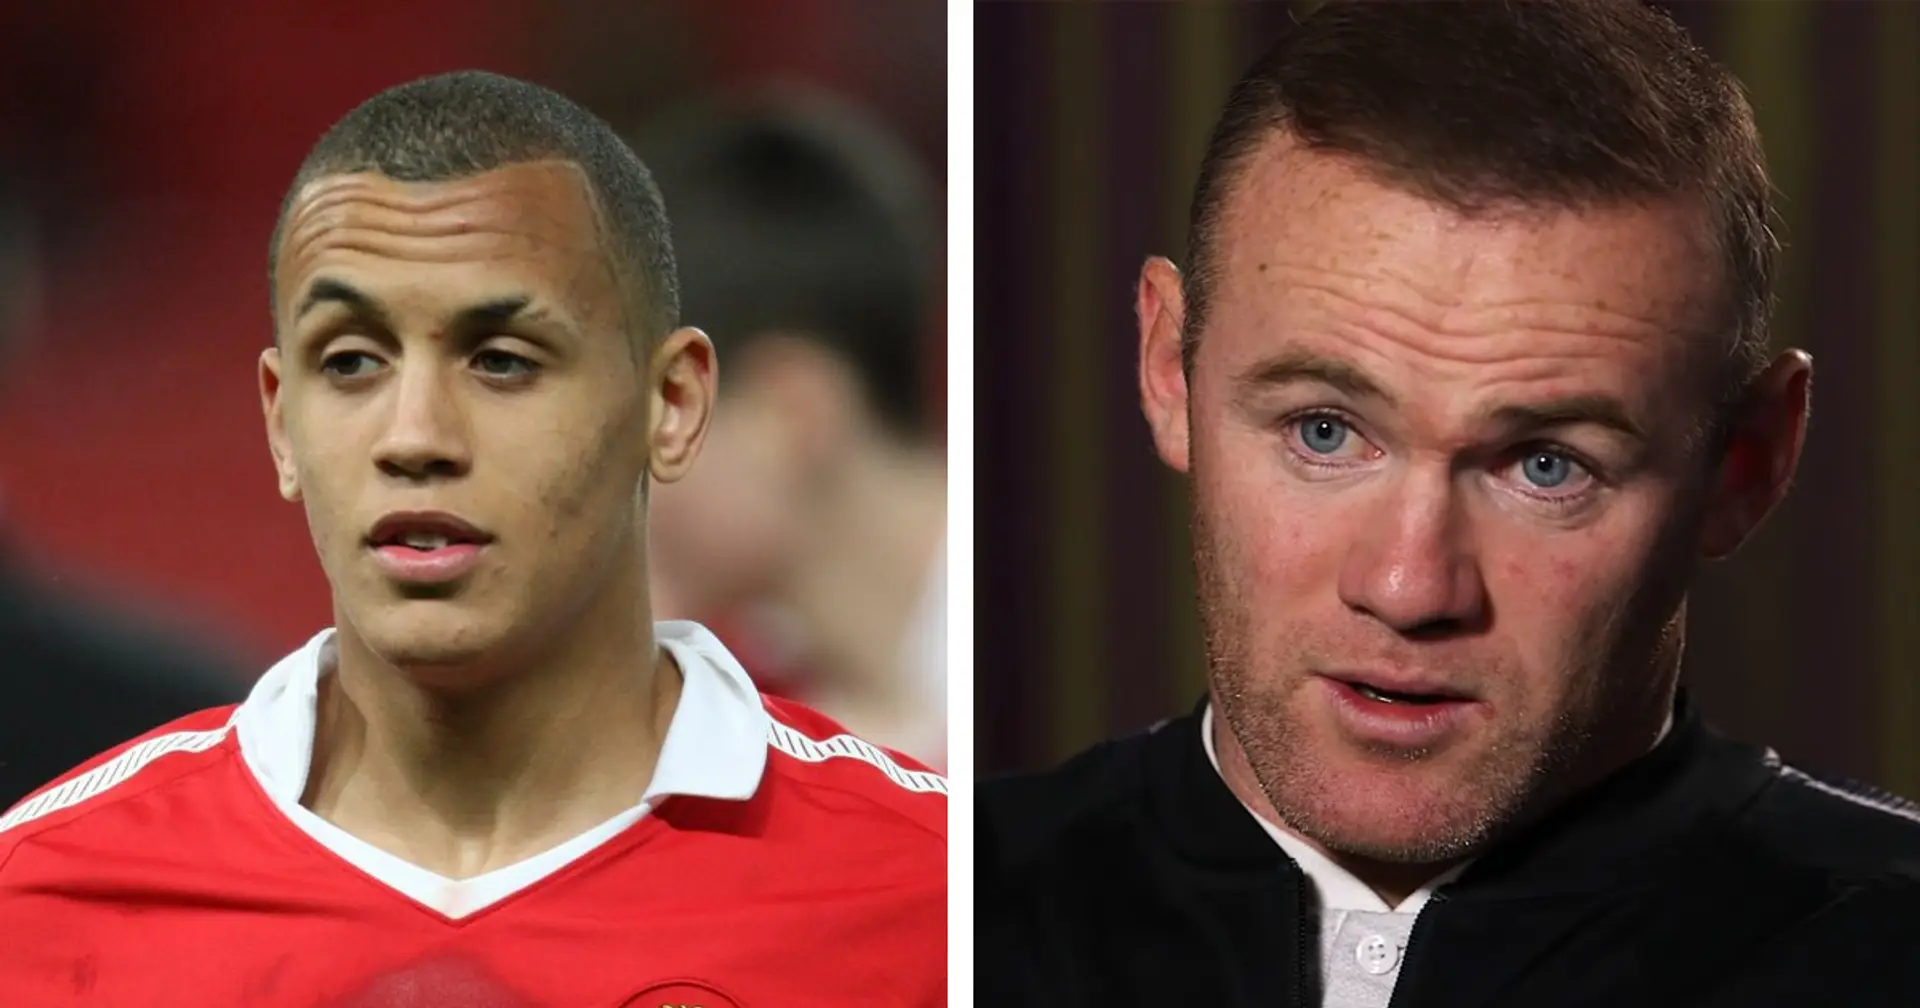 Wayne Rooney recalls smashing Ravel Morrison's phone after he dared to use his phone charger in United dressing room